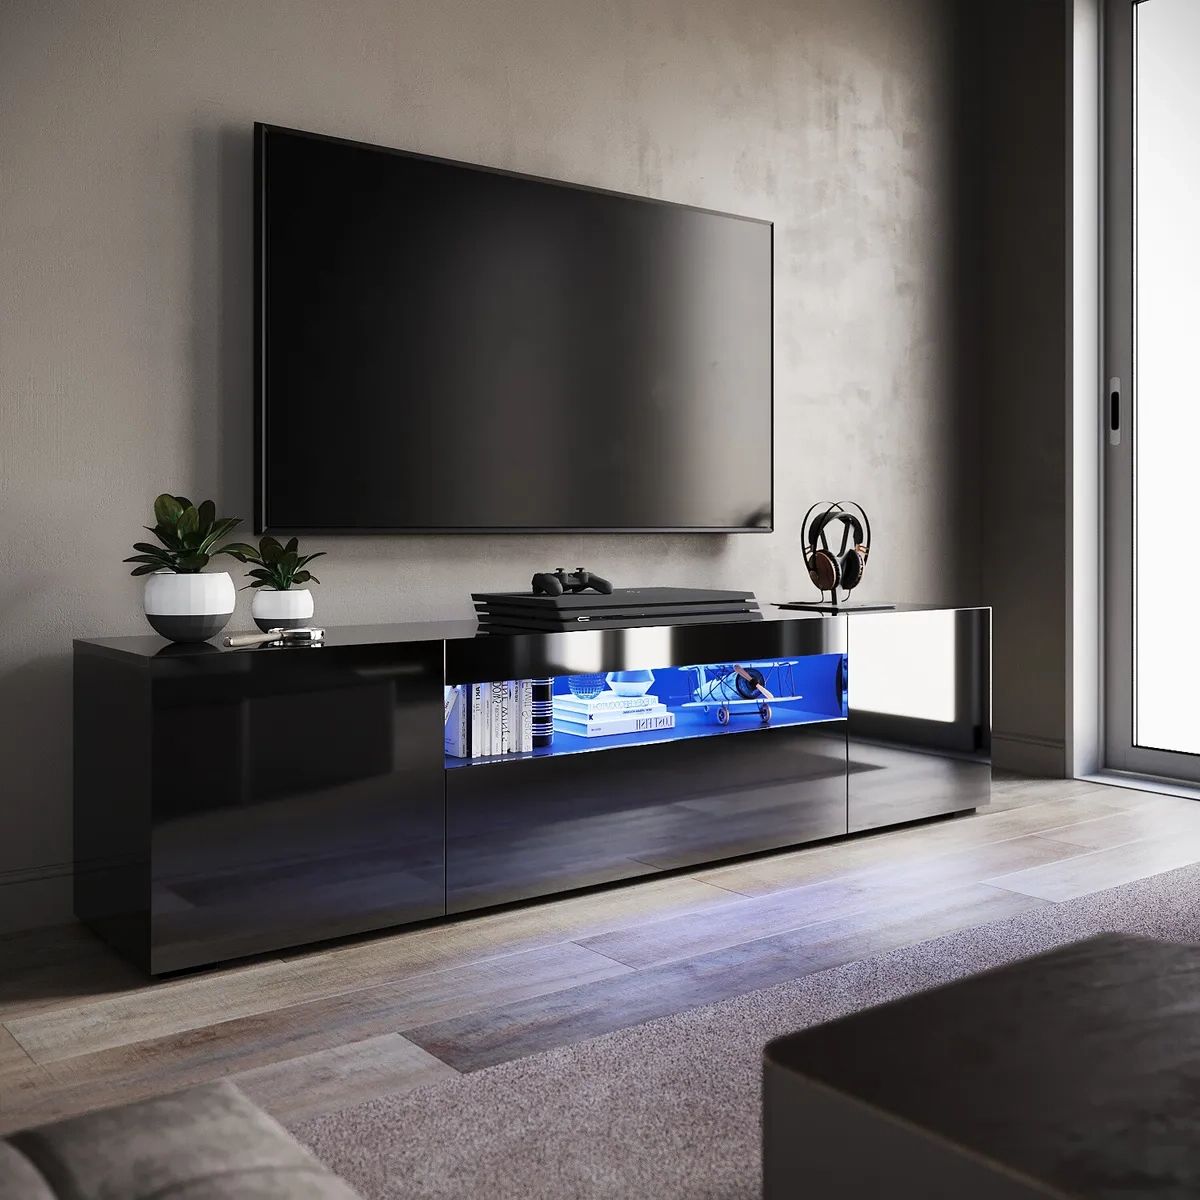 200cm High Gloss Tv Stand Black Cabinet Unit Doors Storage With Rgb Led  Cupboard | Ebay In Black Rgb Entertainment Centers (View 10 of 20)